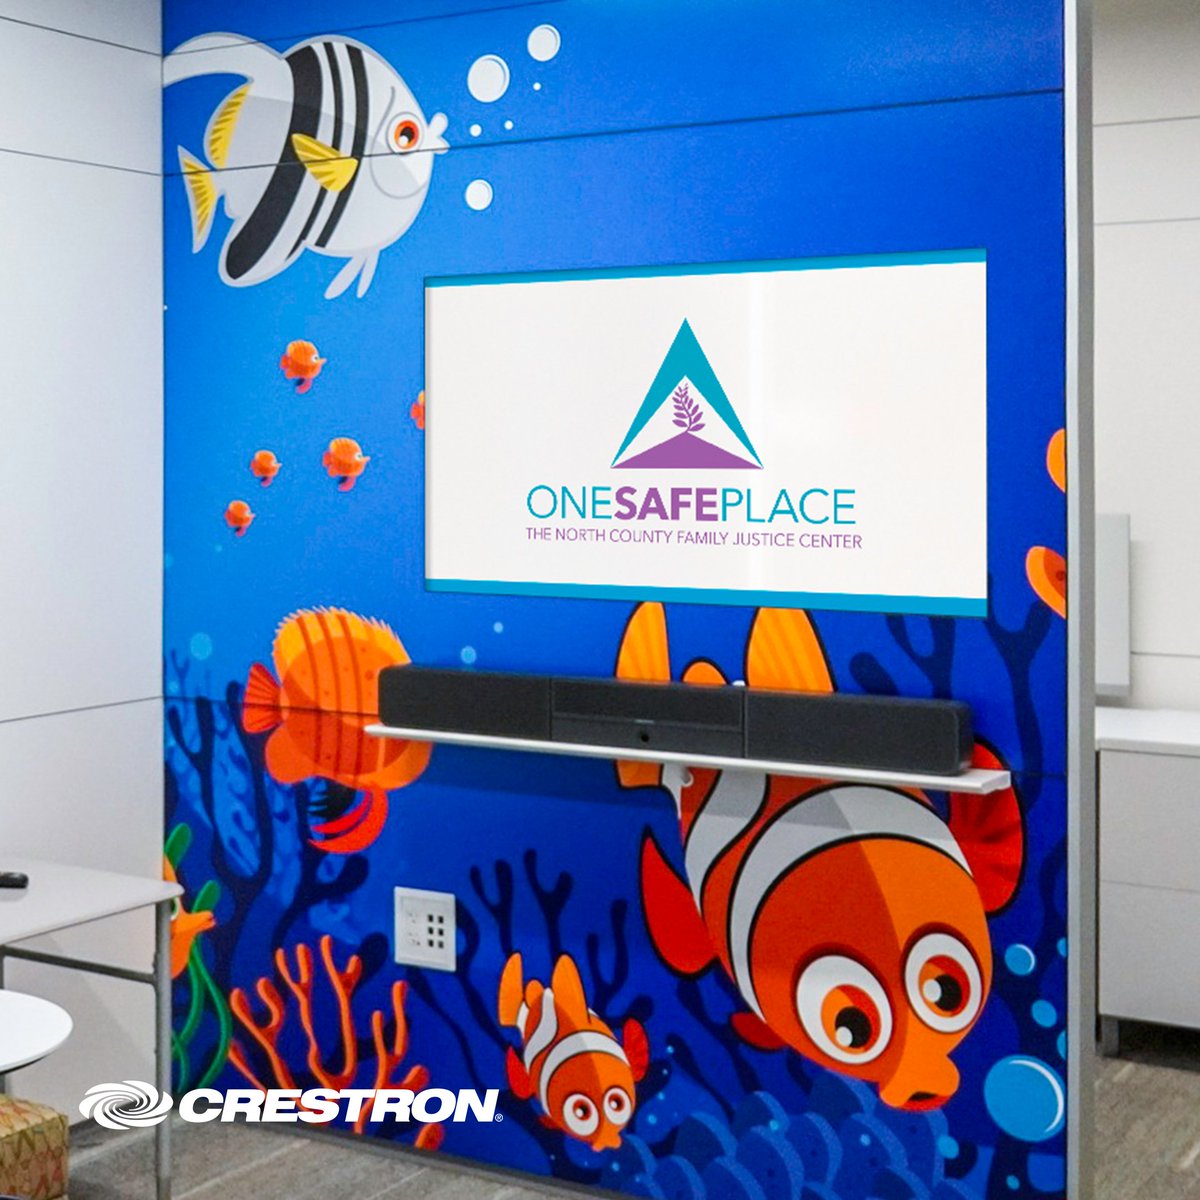 One Safe Place provides comprehensive support services at no cost to survivors of abuse. This project relies on digital signage & the integration of Crestron technology, so the building can operate effortlessly. Read more. ow.ly/MioS50Rpuwo